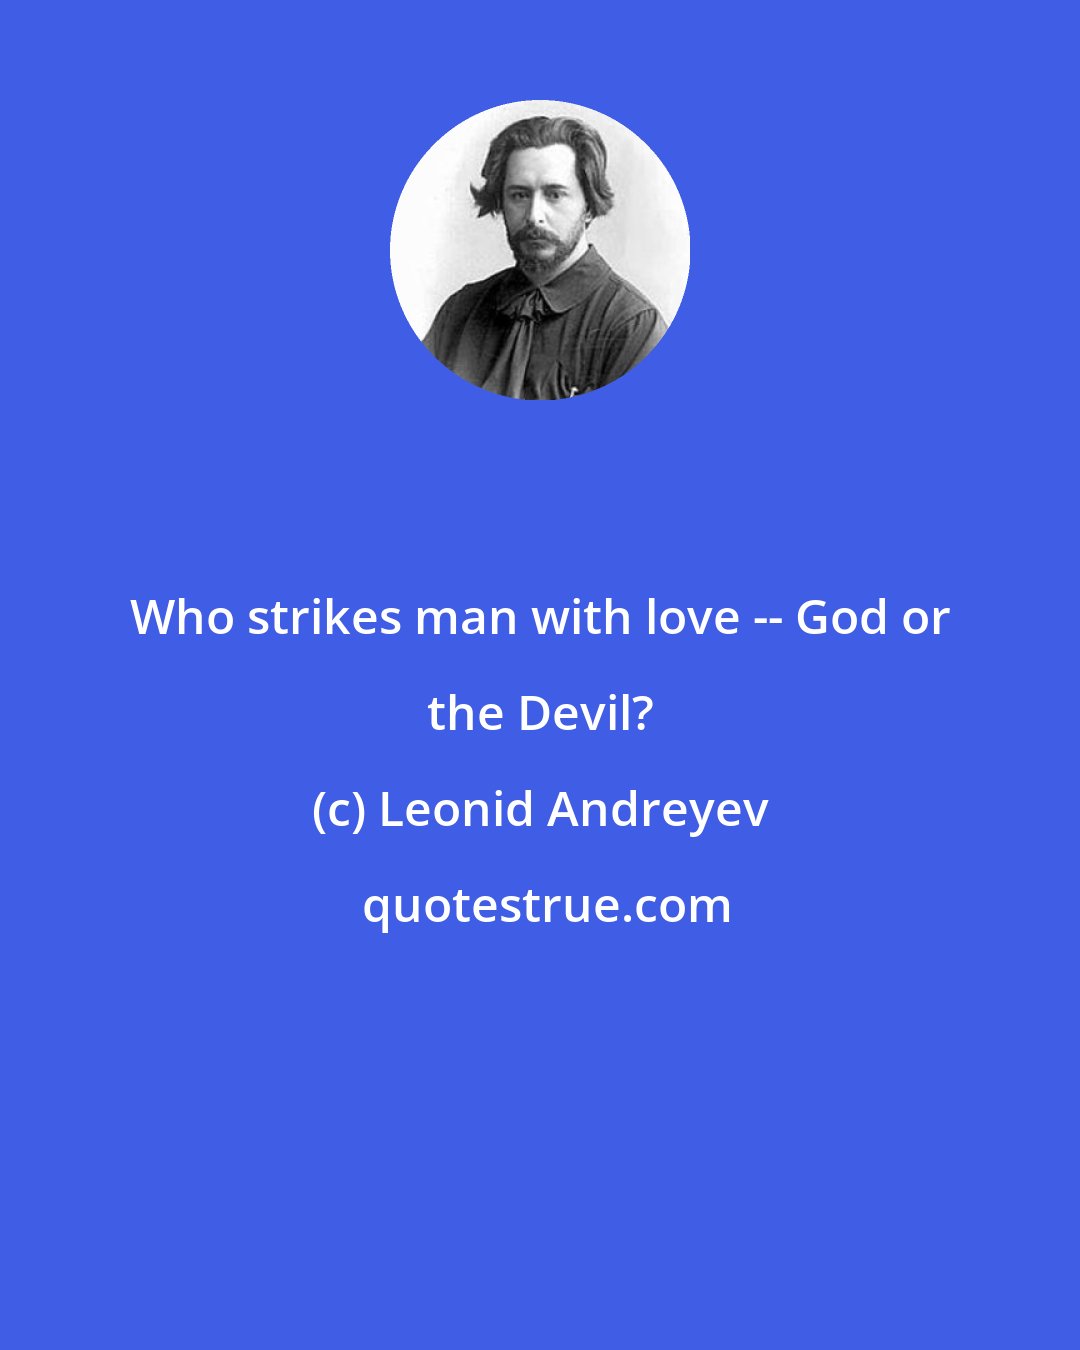 Leonid Andreyev: Who strikes man with love -- God or the Devil?